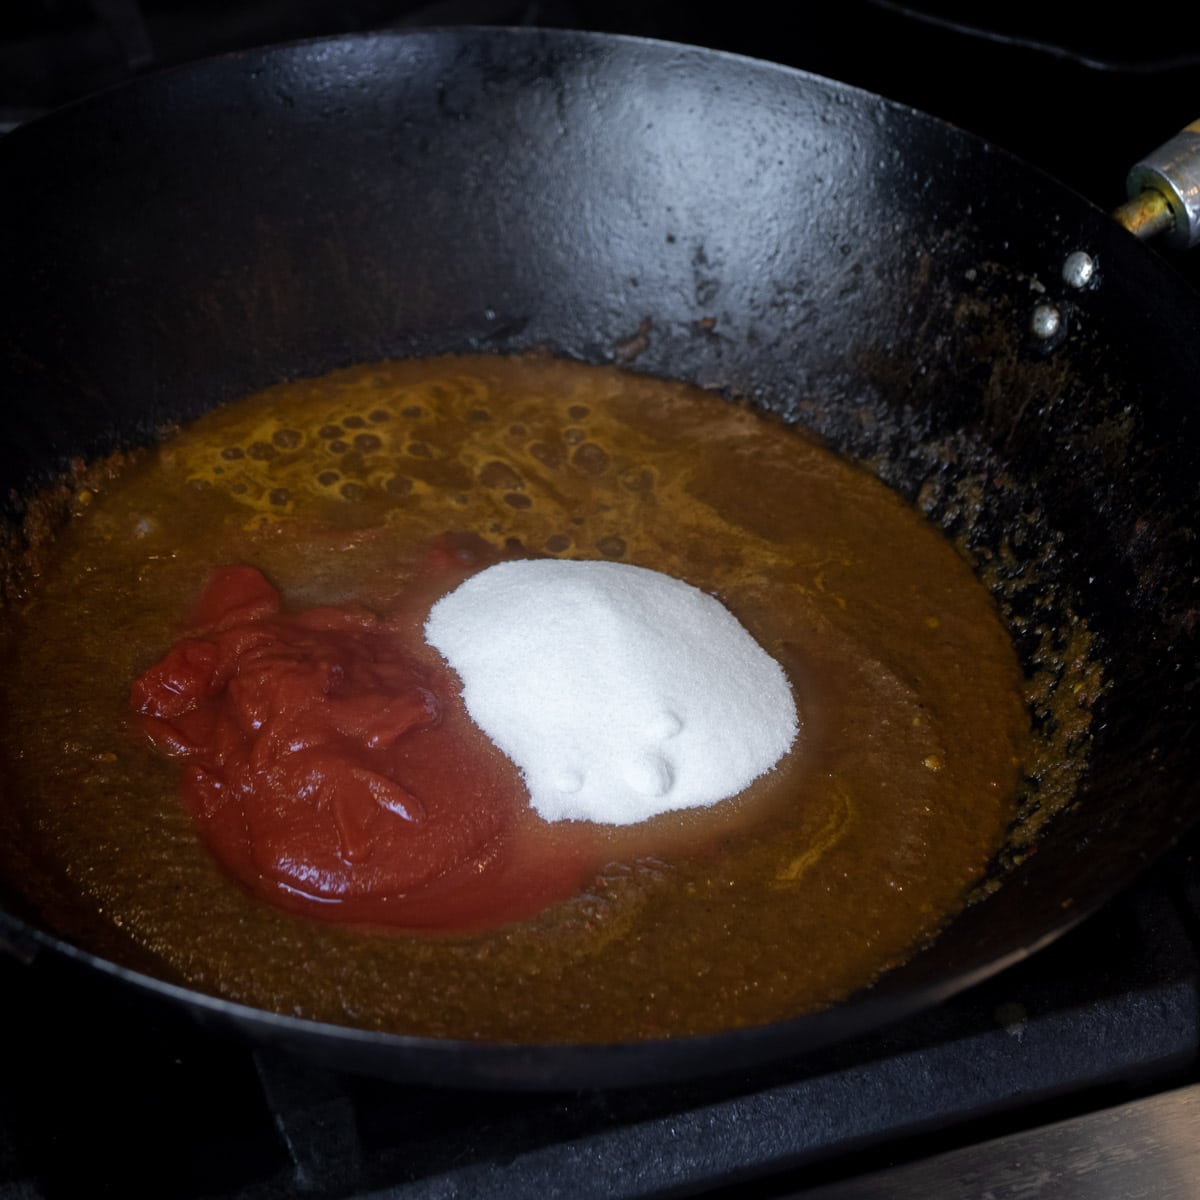 Crushed tomatoes and sugar added to the chili paste in a pan.